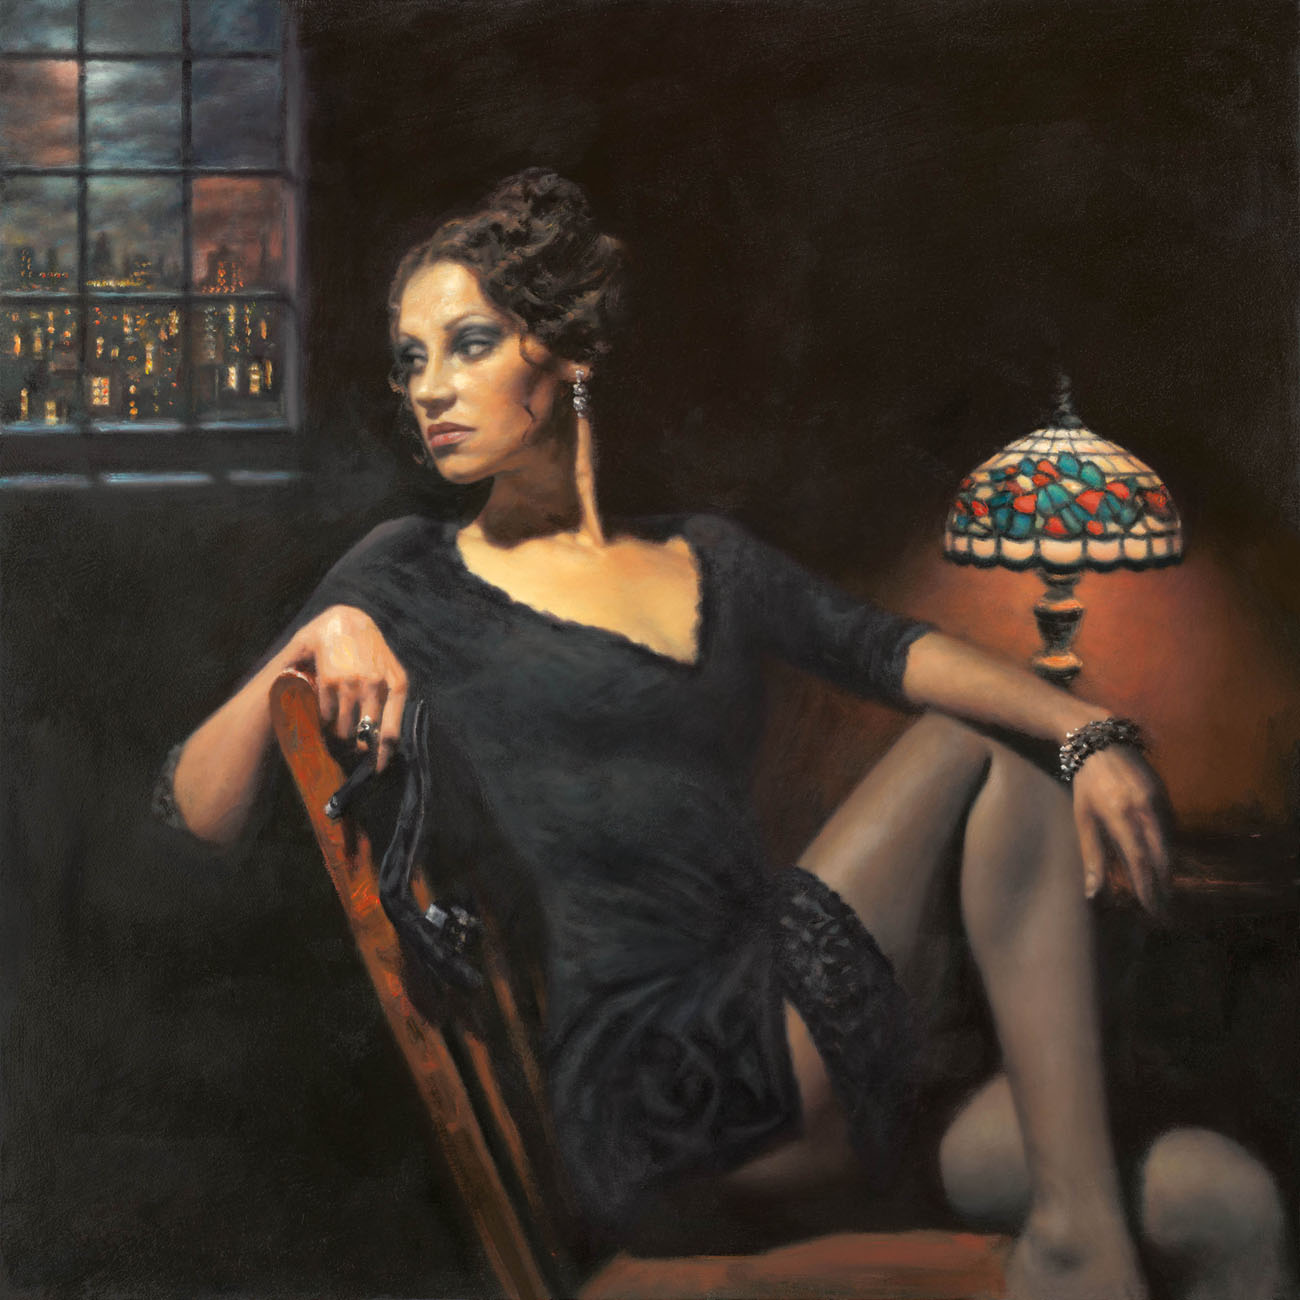 hamish-blakely-the-night-is-hers-HBGC53-r.jpg